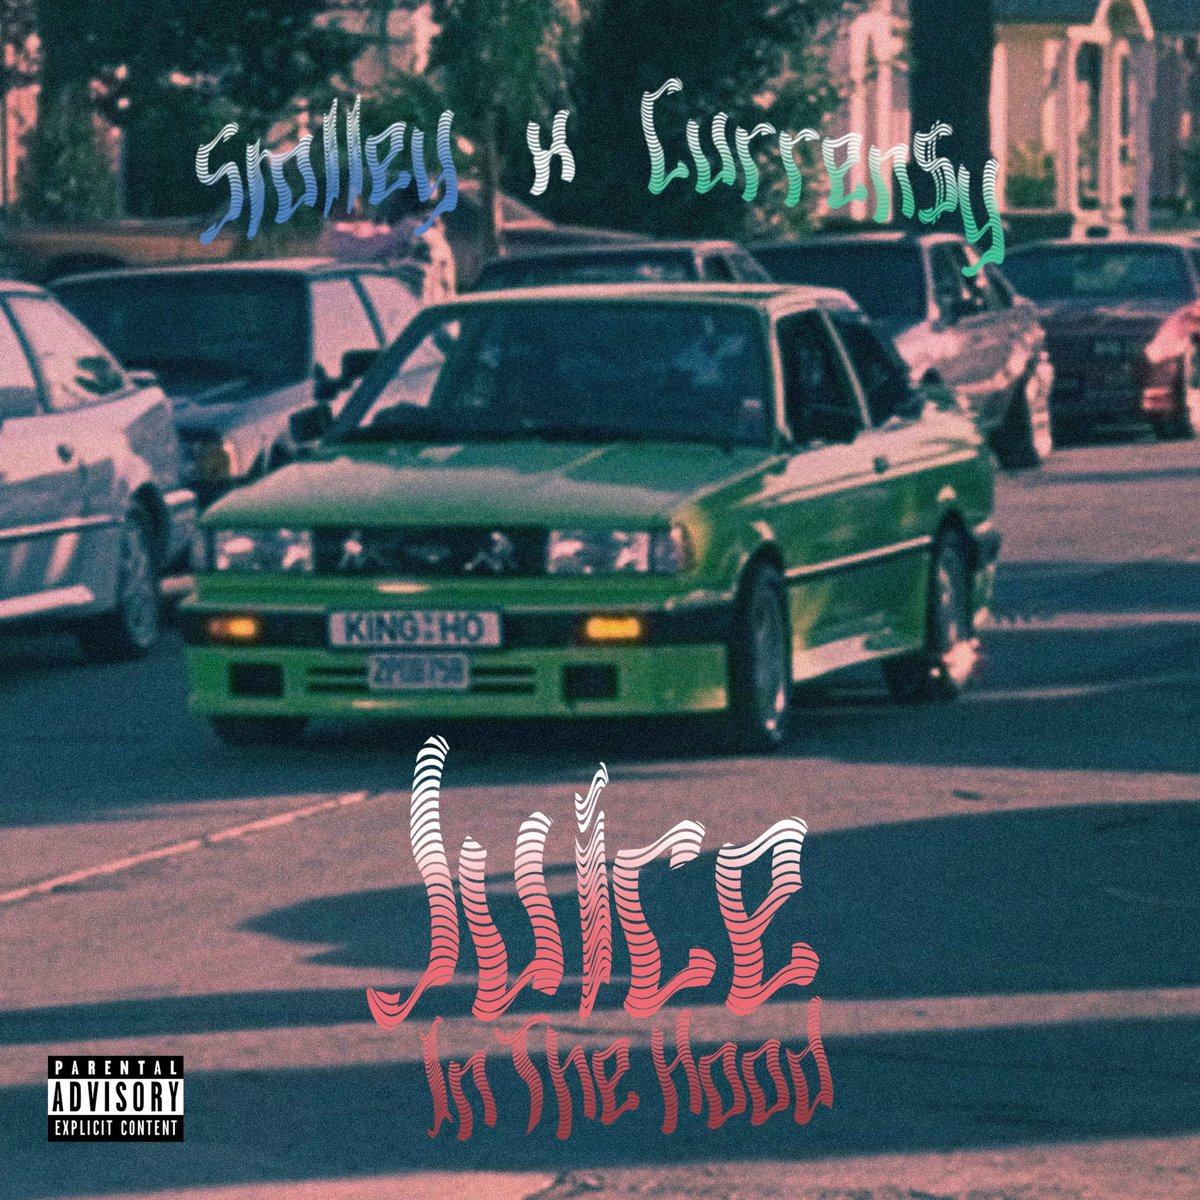 New @Stalley x @CurrenSy_Spitta produced by me and @SmittyBeatz_